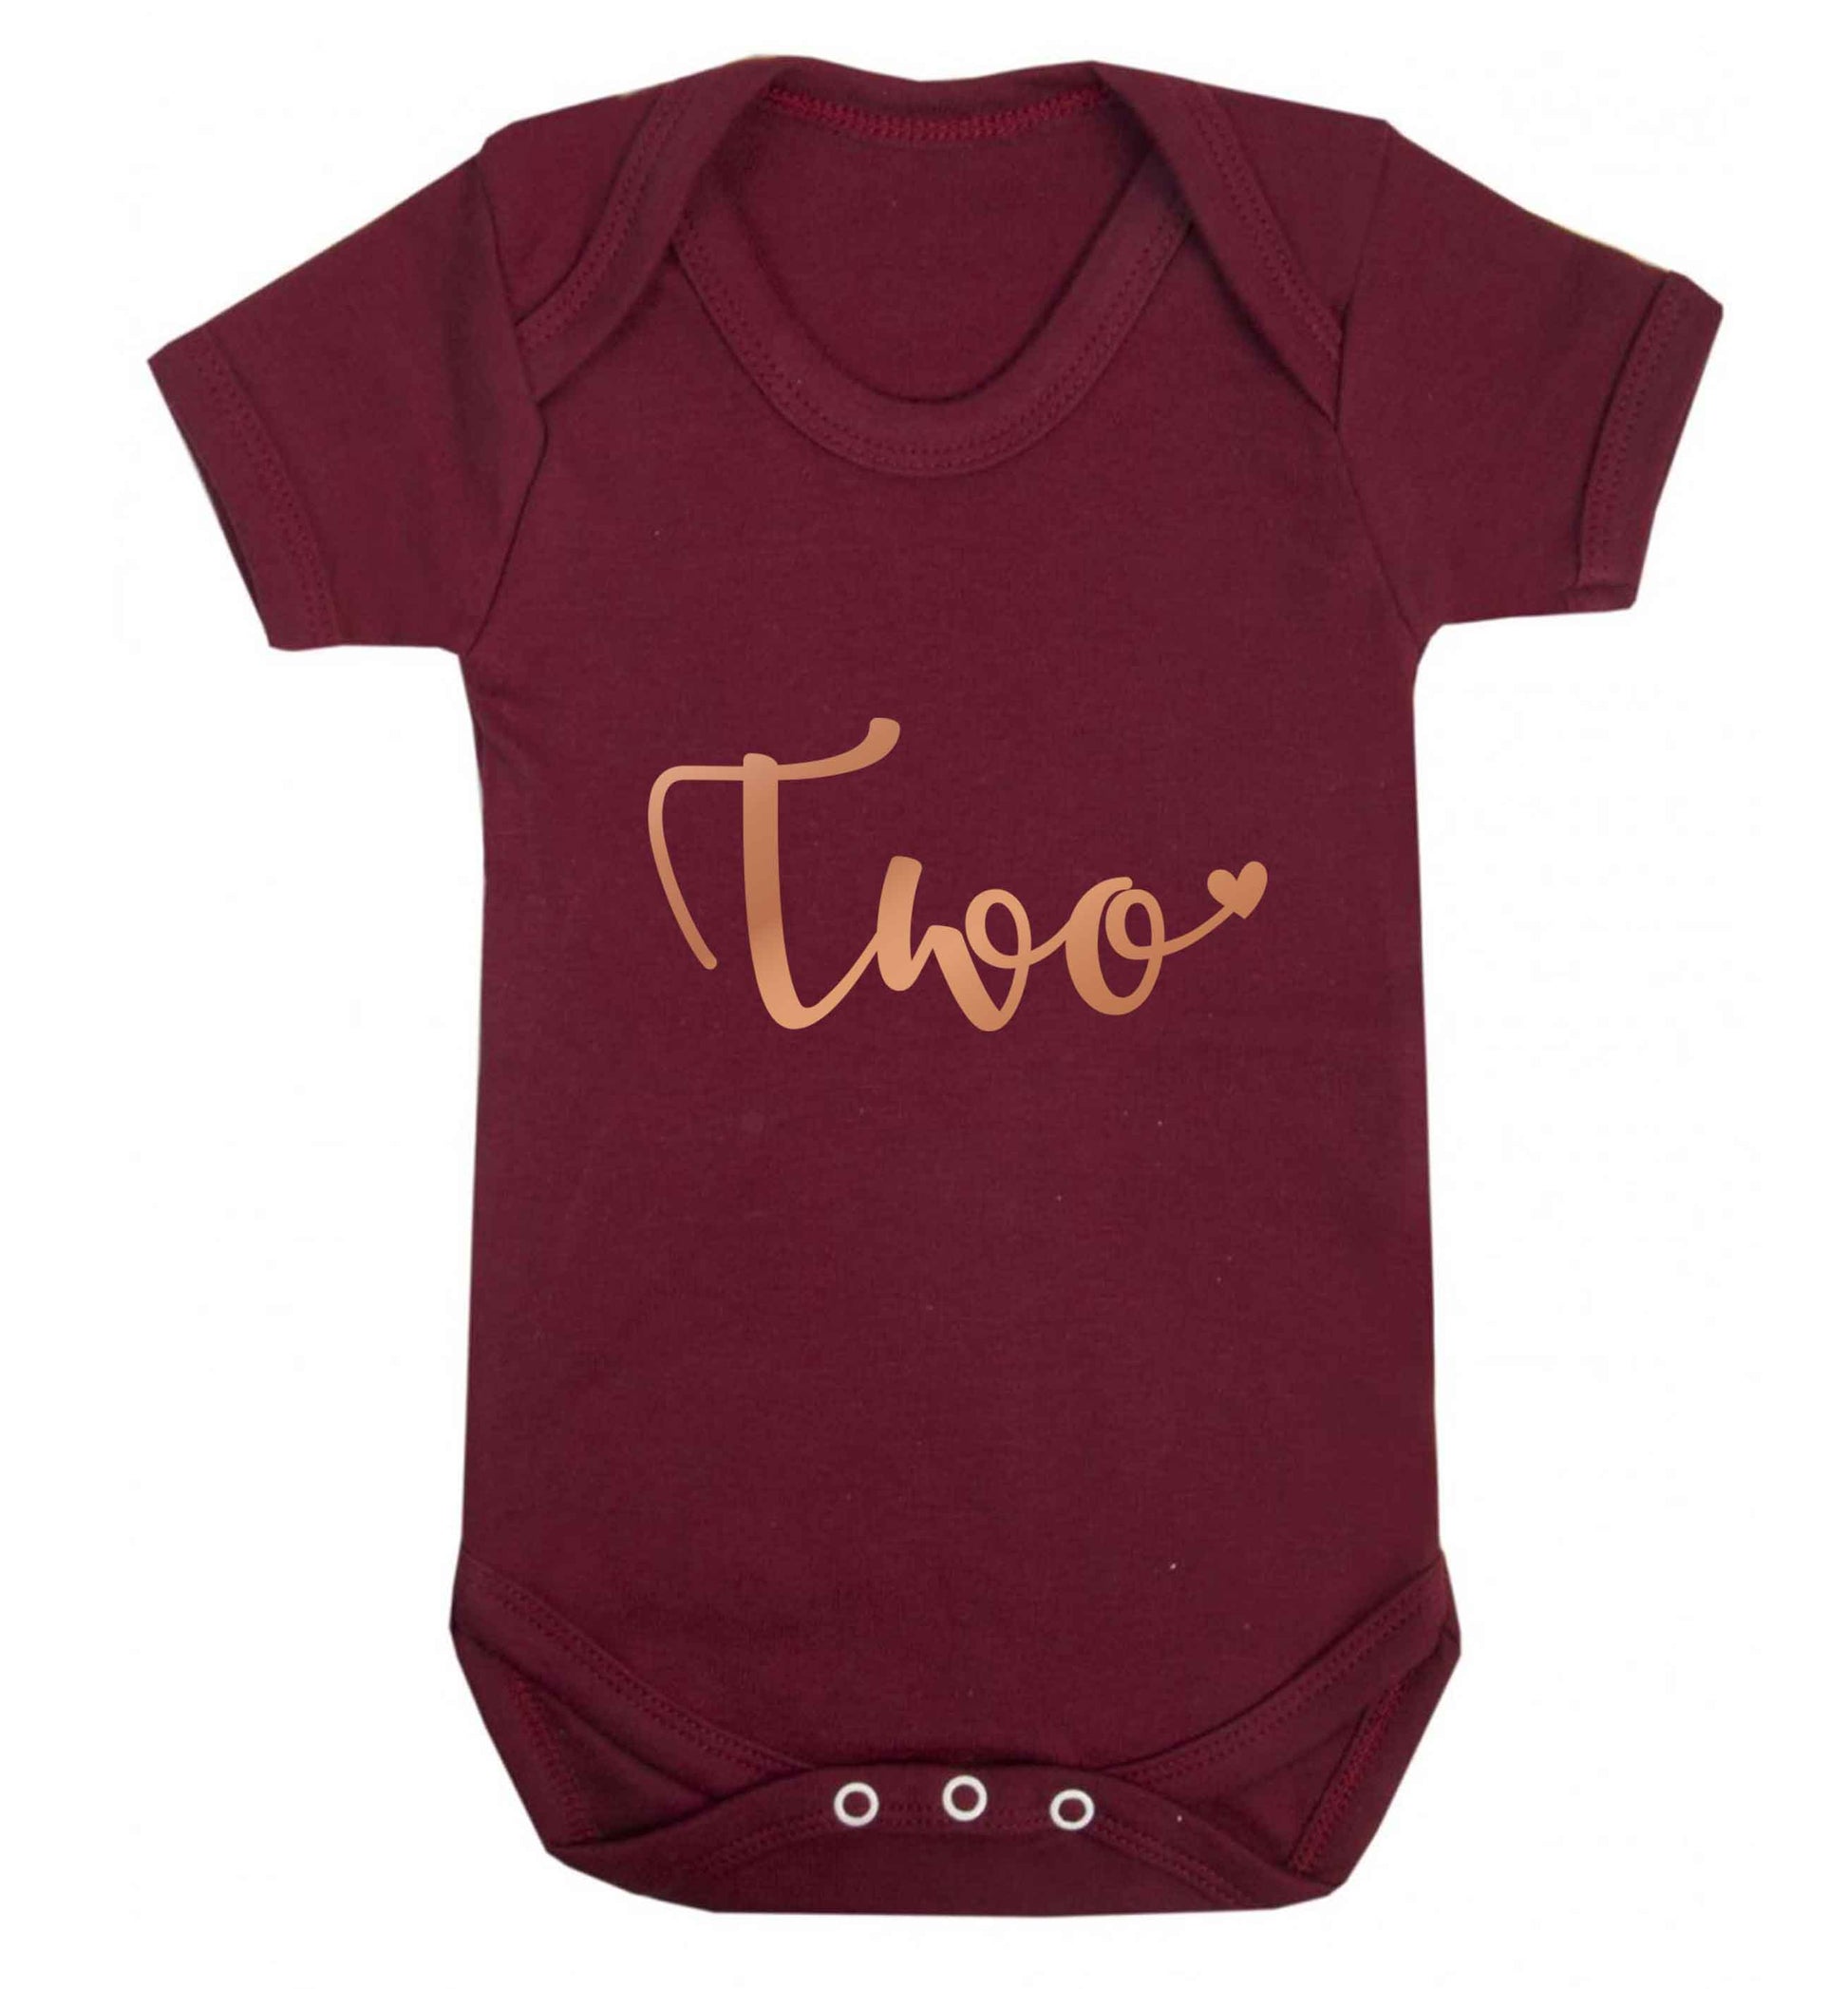 Two rose gold baby vest maroon 18-24 months